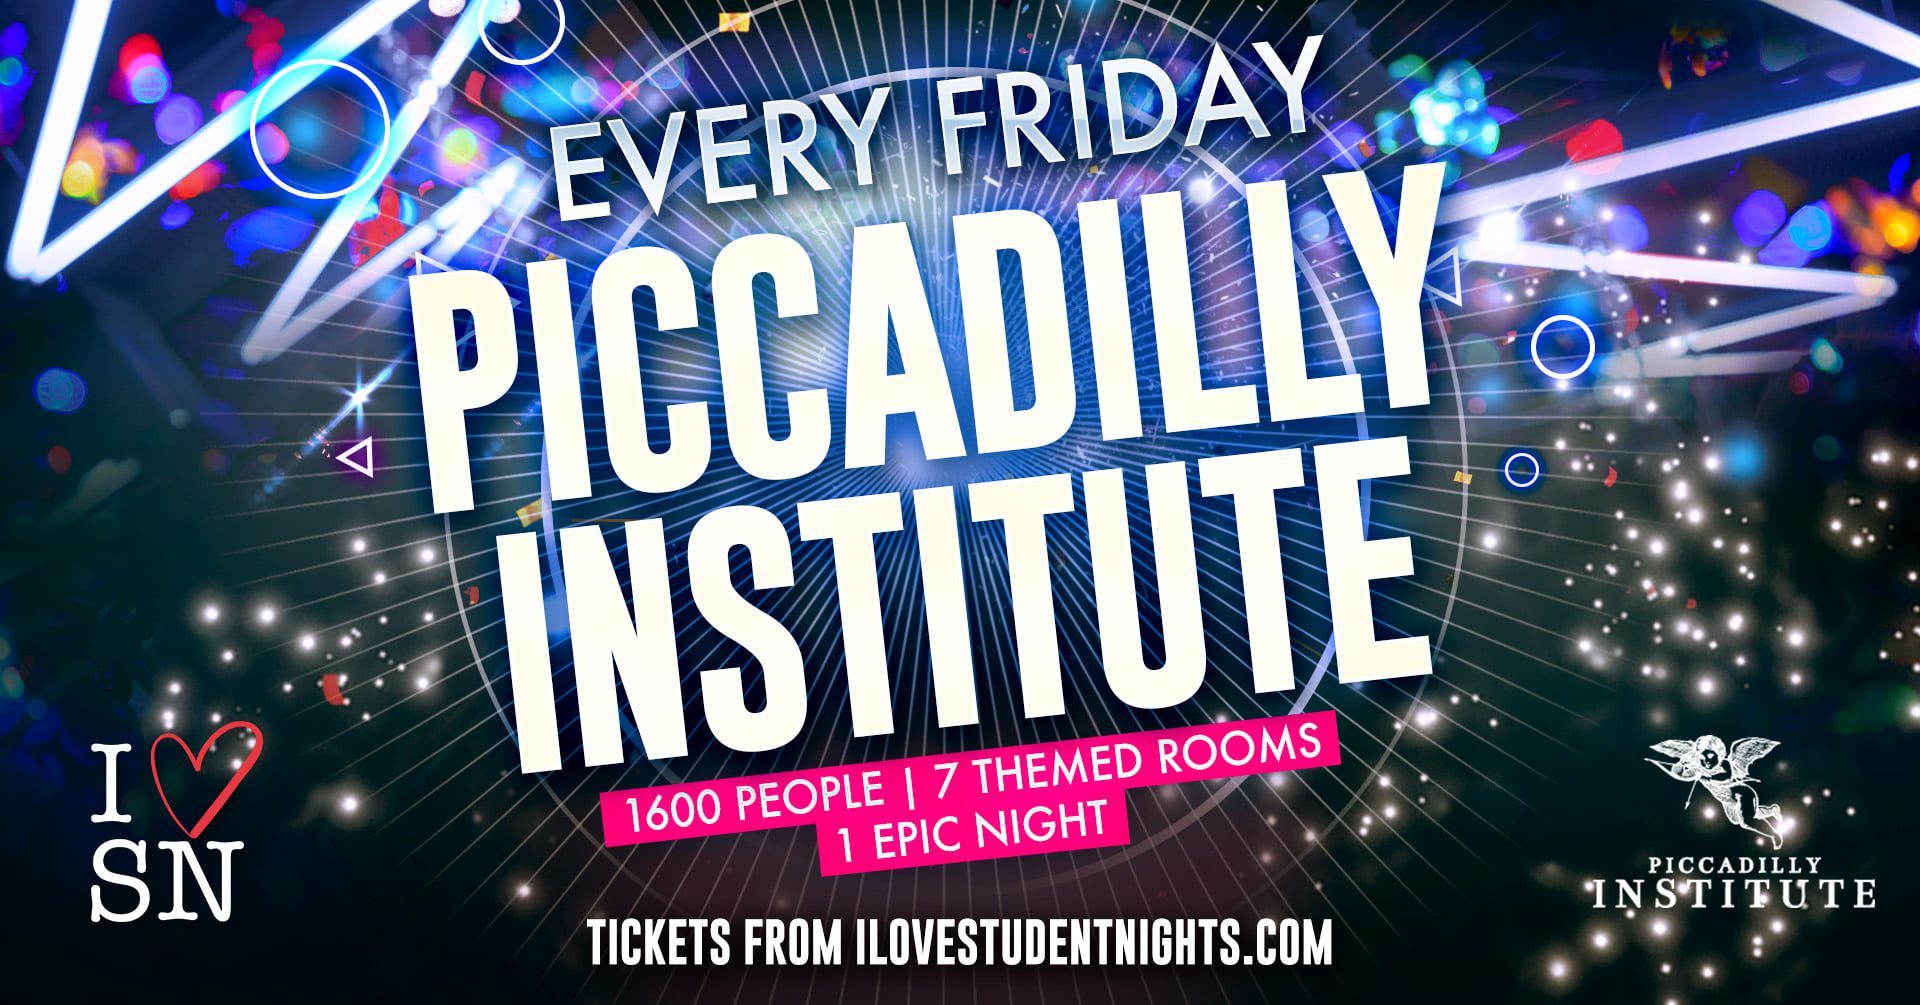 Piccadilly Institute every Friday